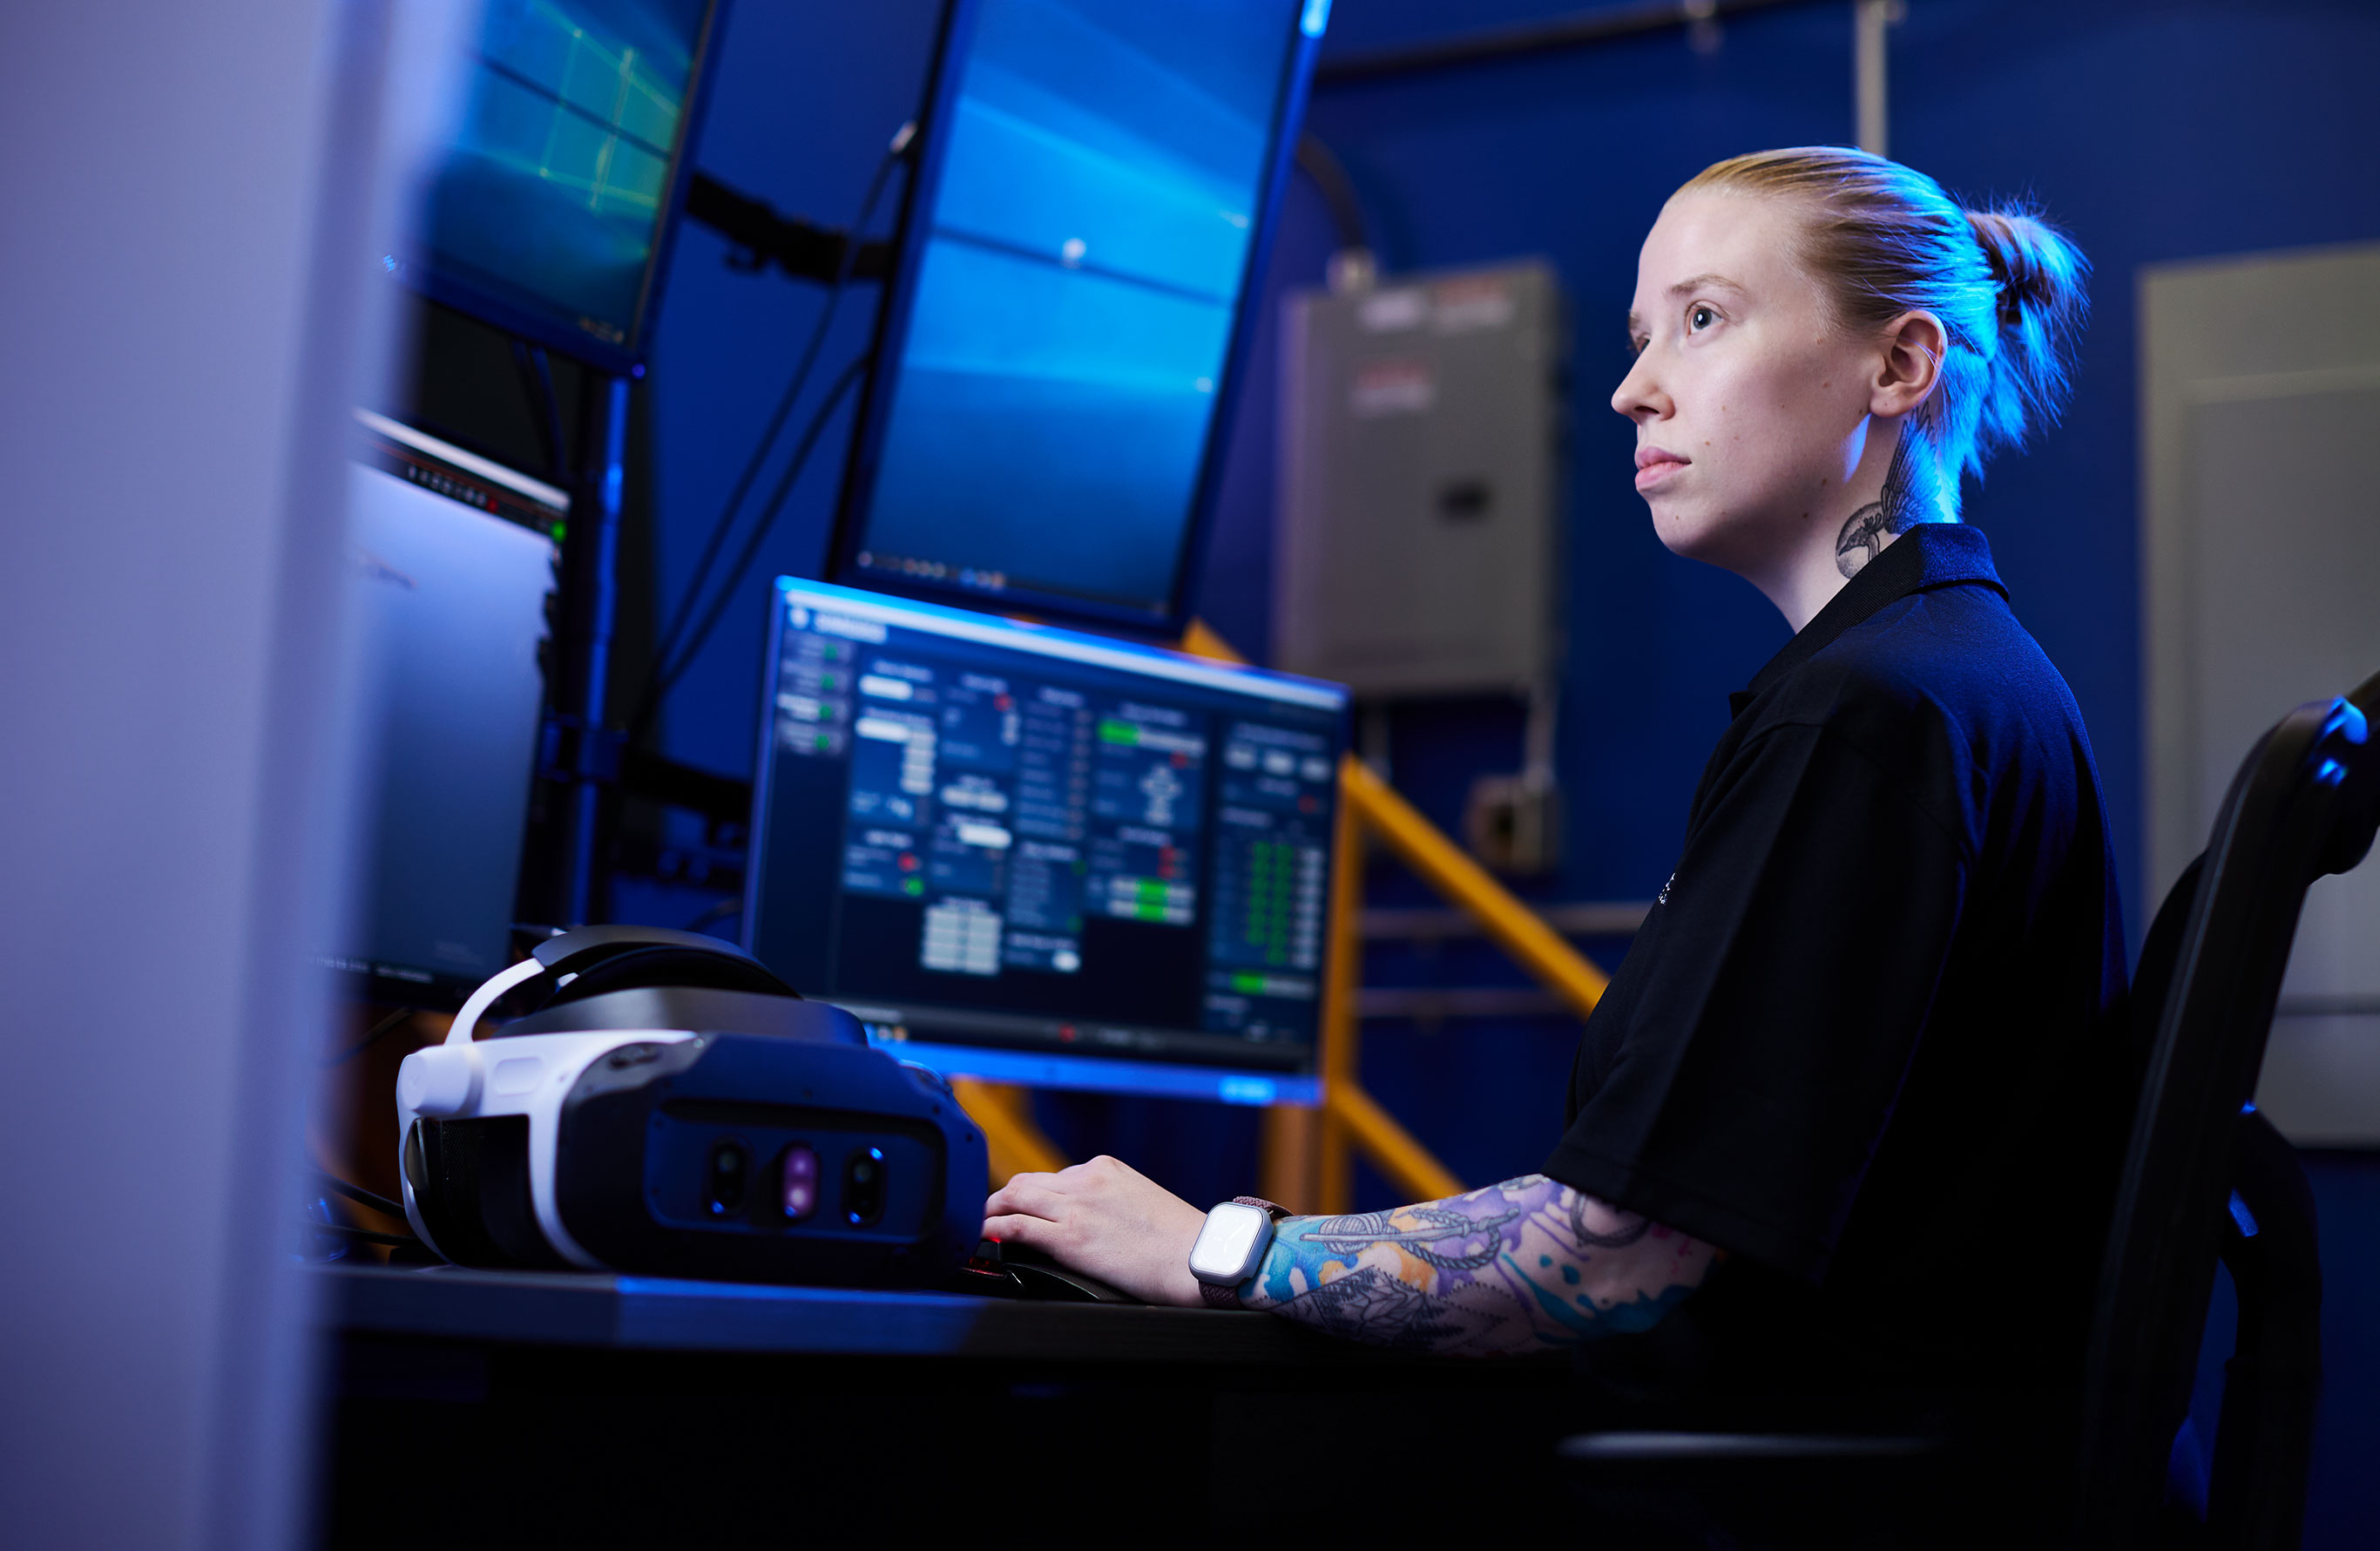 Header Image. Tattooed young woman at computer workstation